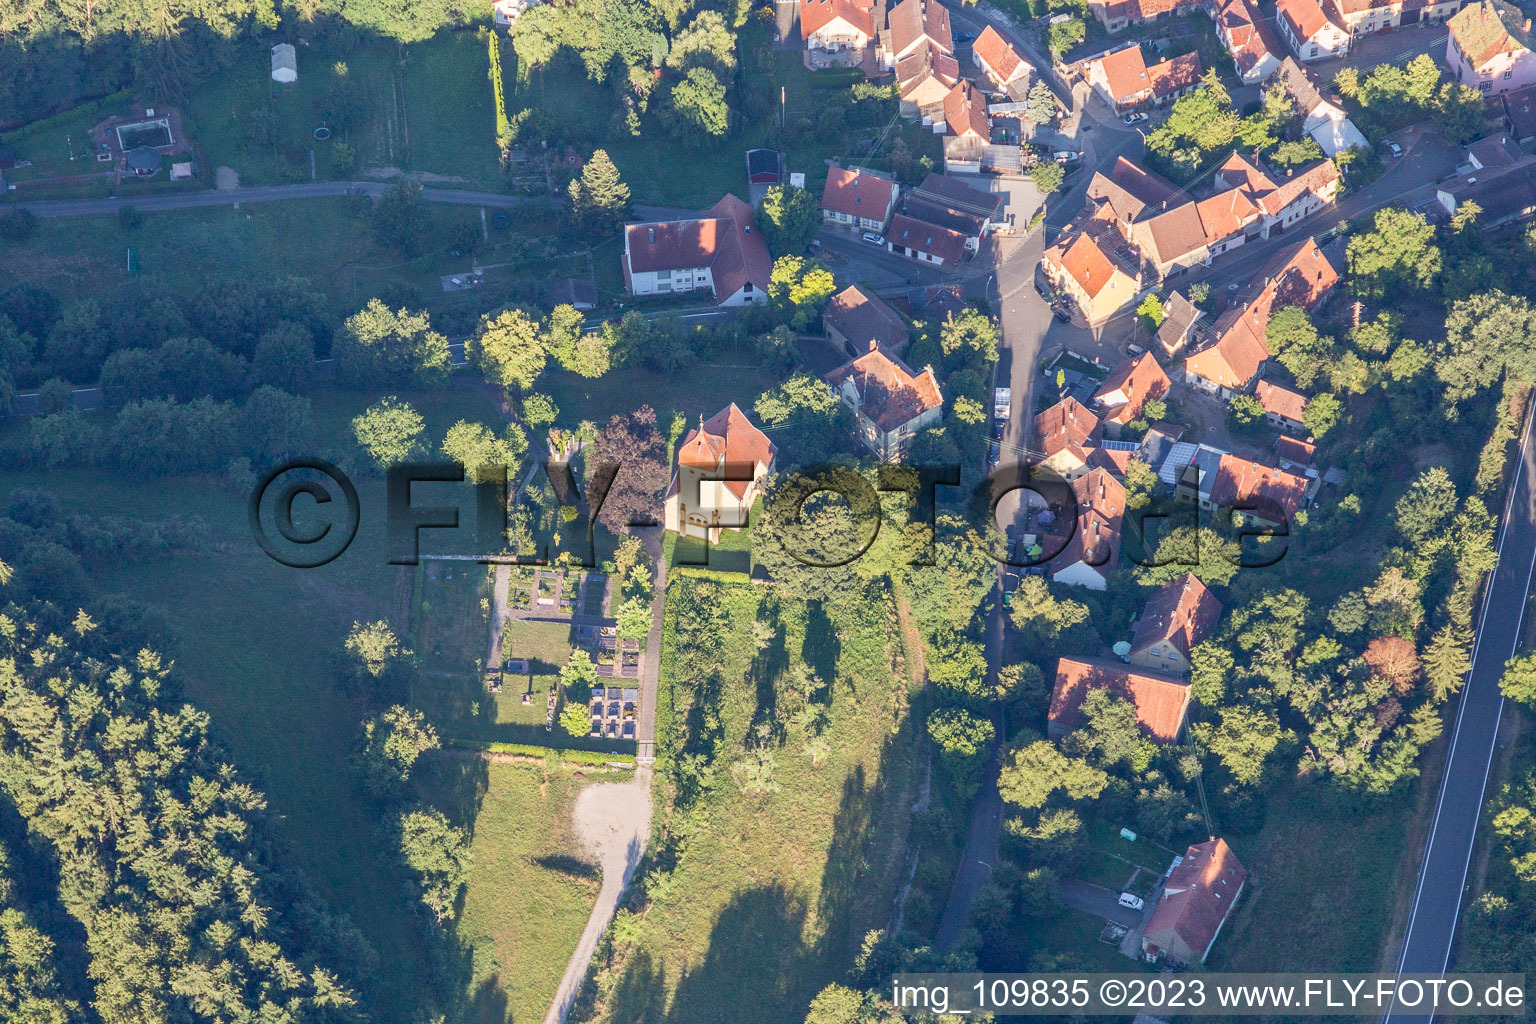 Aerial photograpy of Rathskirchen in the state Rhineland-Palatinate, Germany